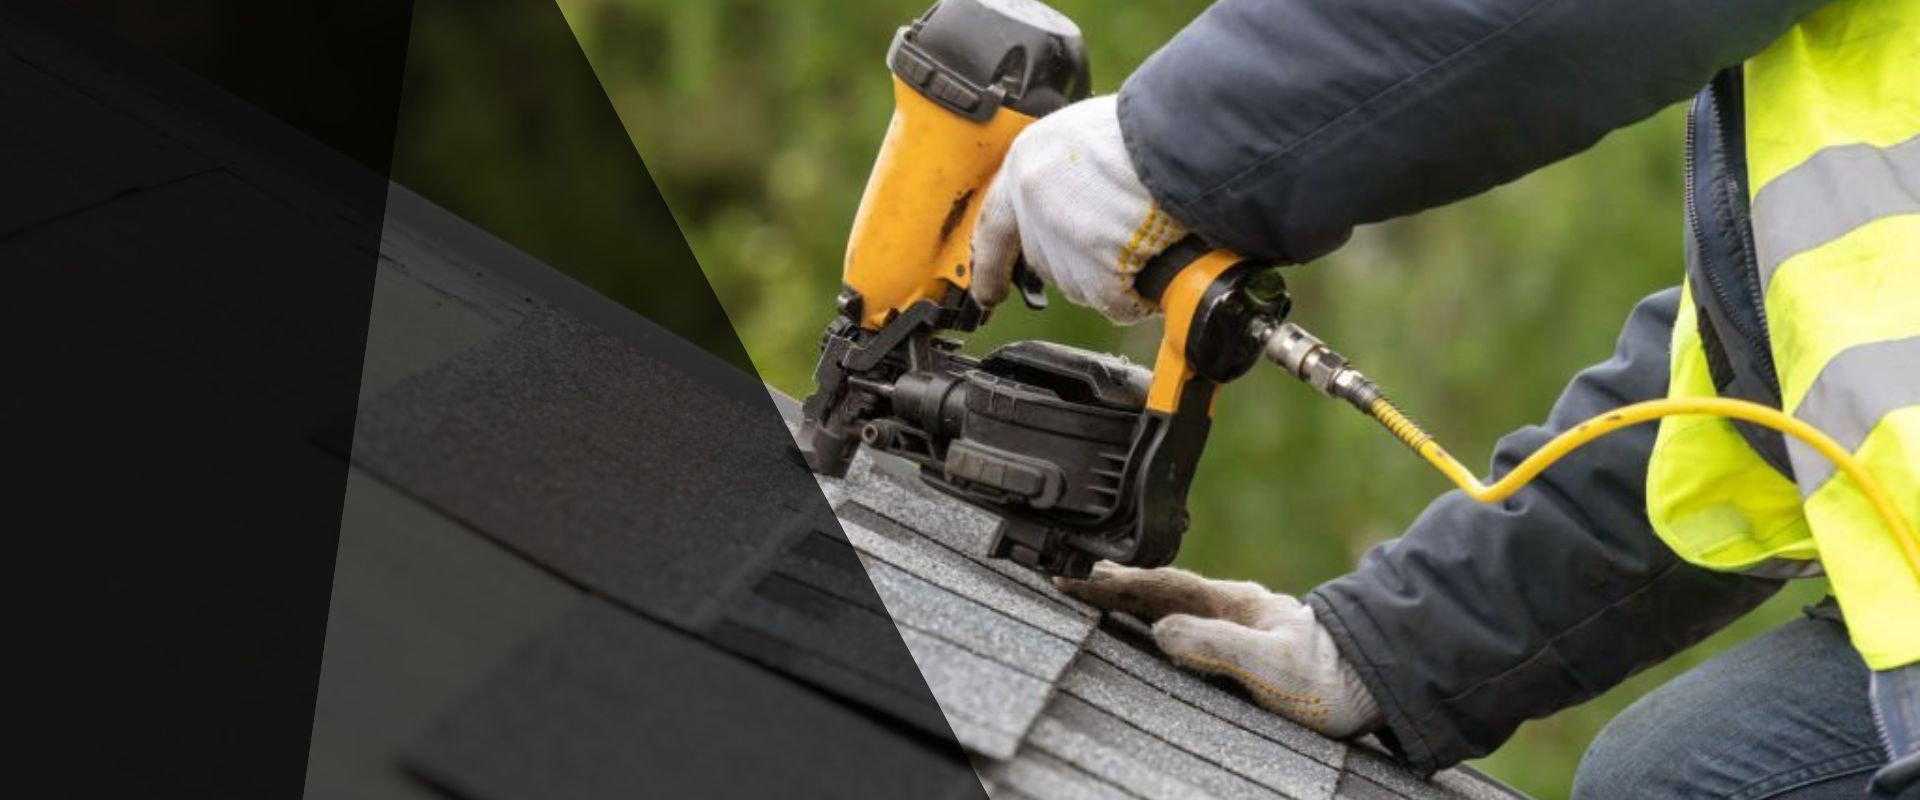 Efficient Roofing Repairs Tips for Roofing Contractors